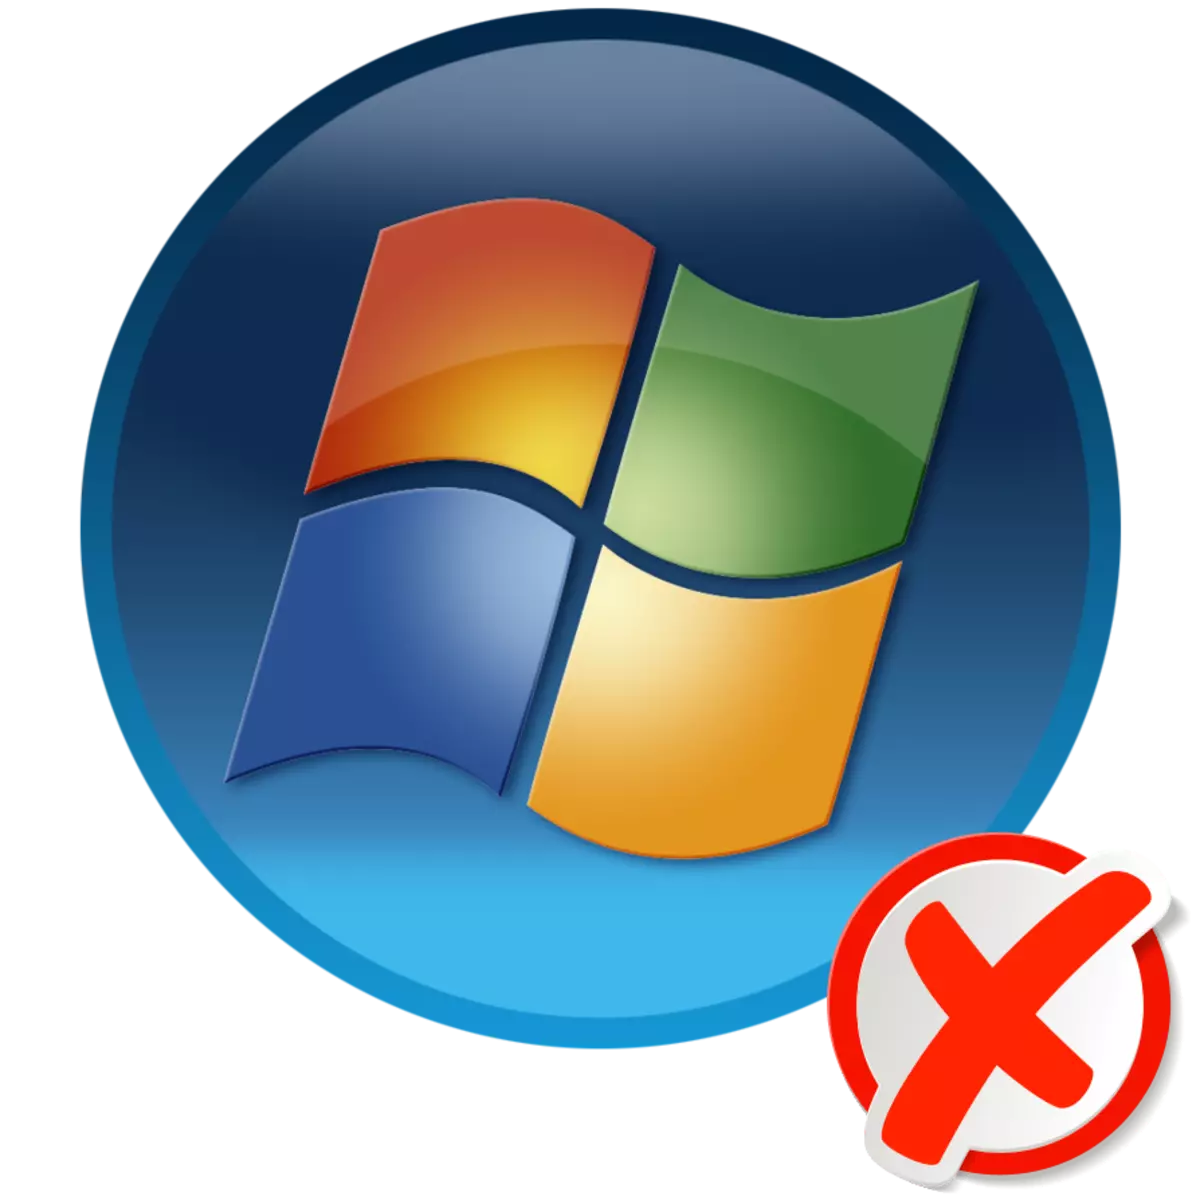 Fout 0x80070002 in Windows 7